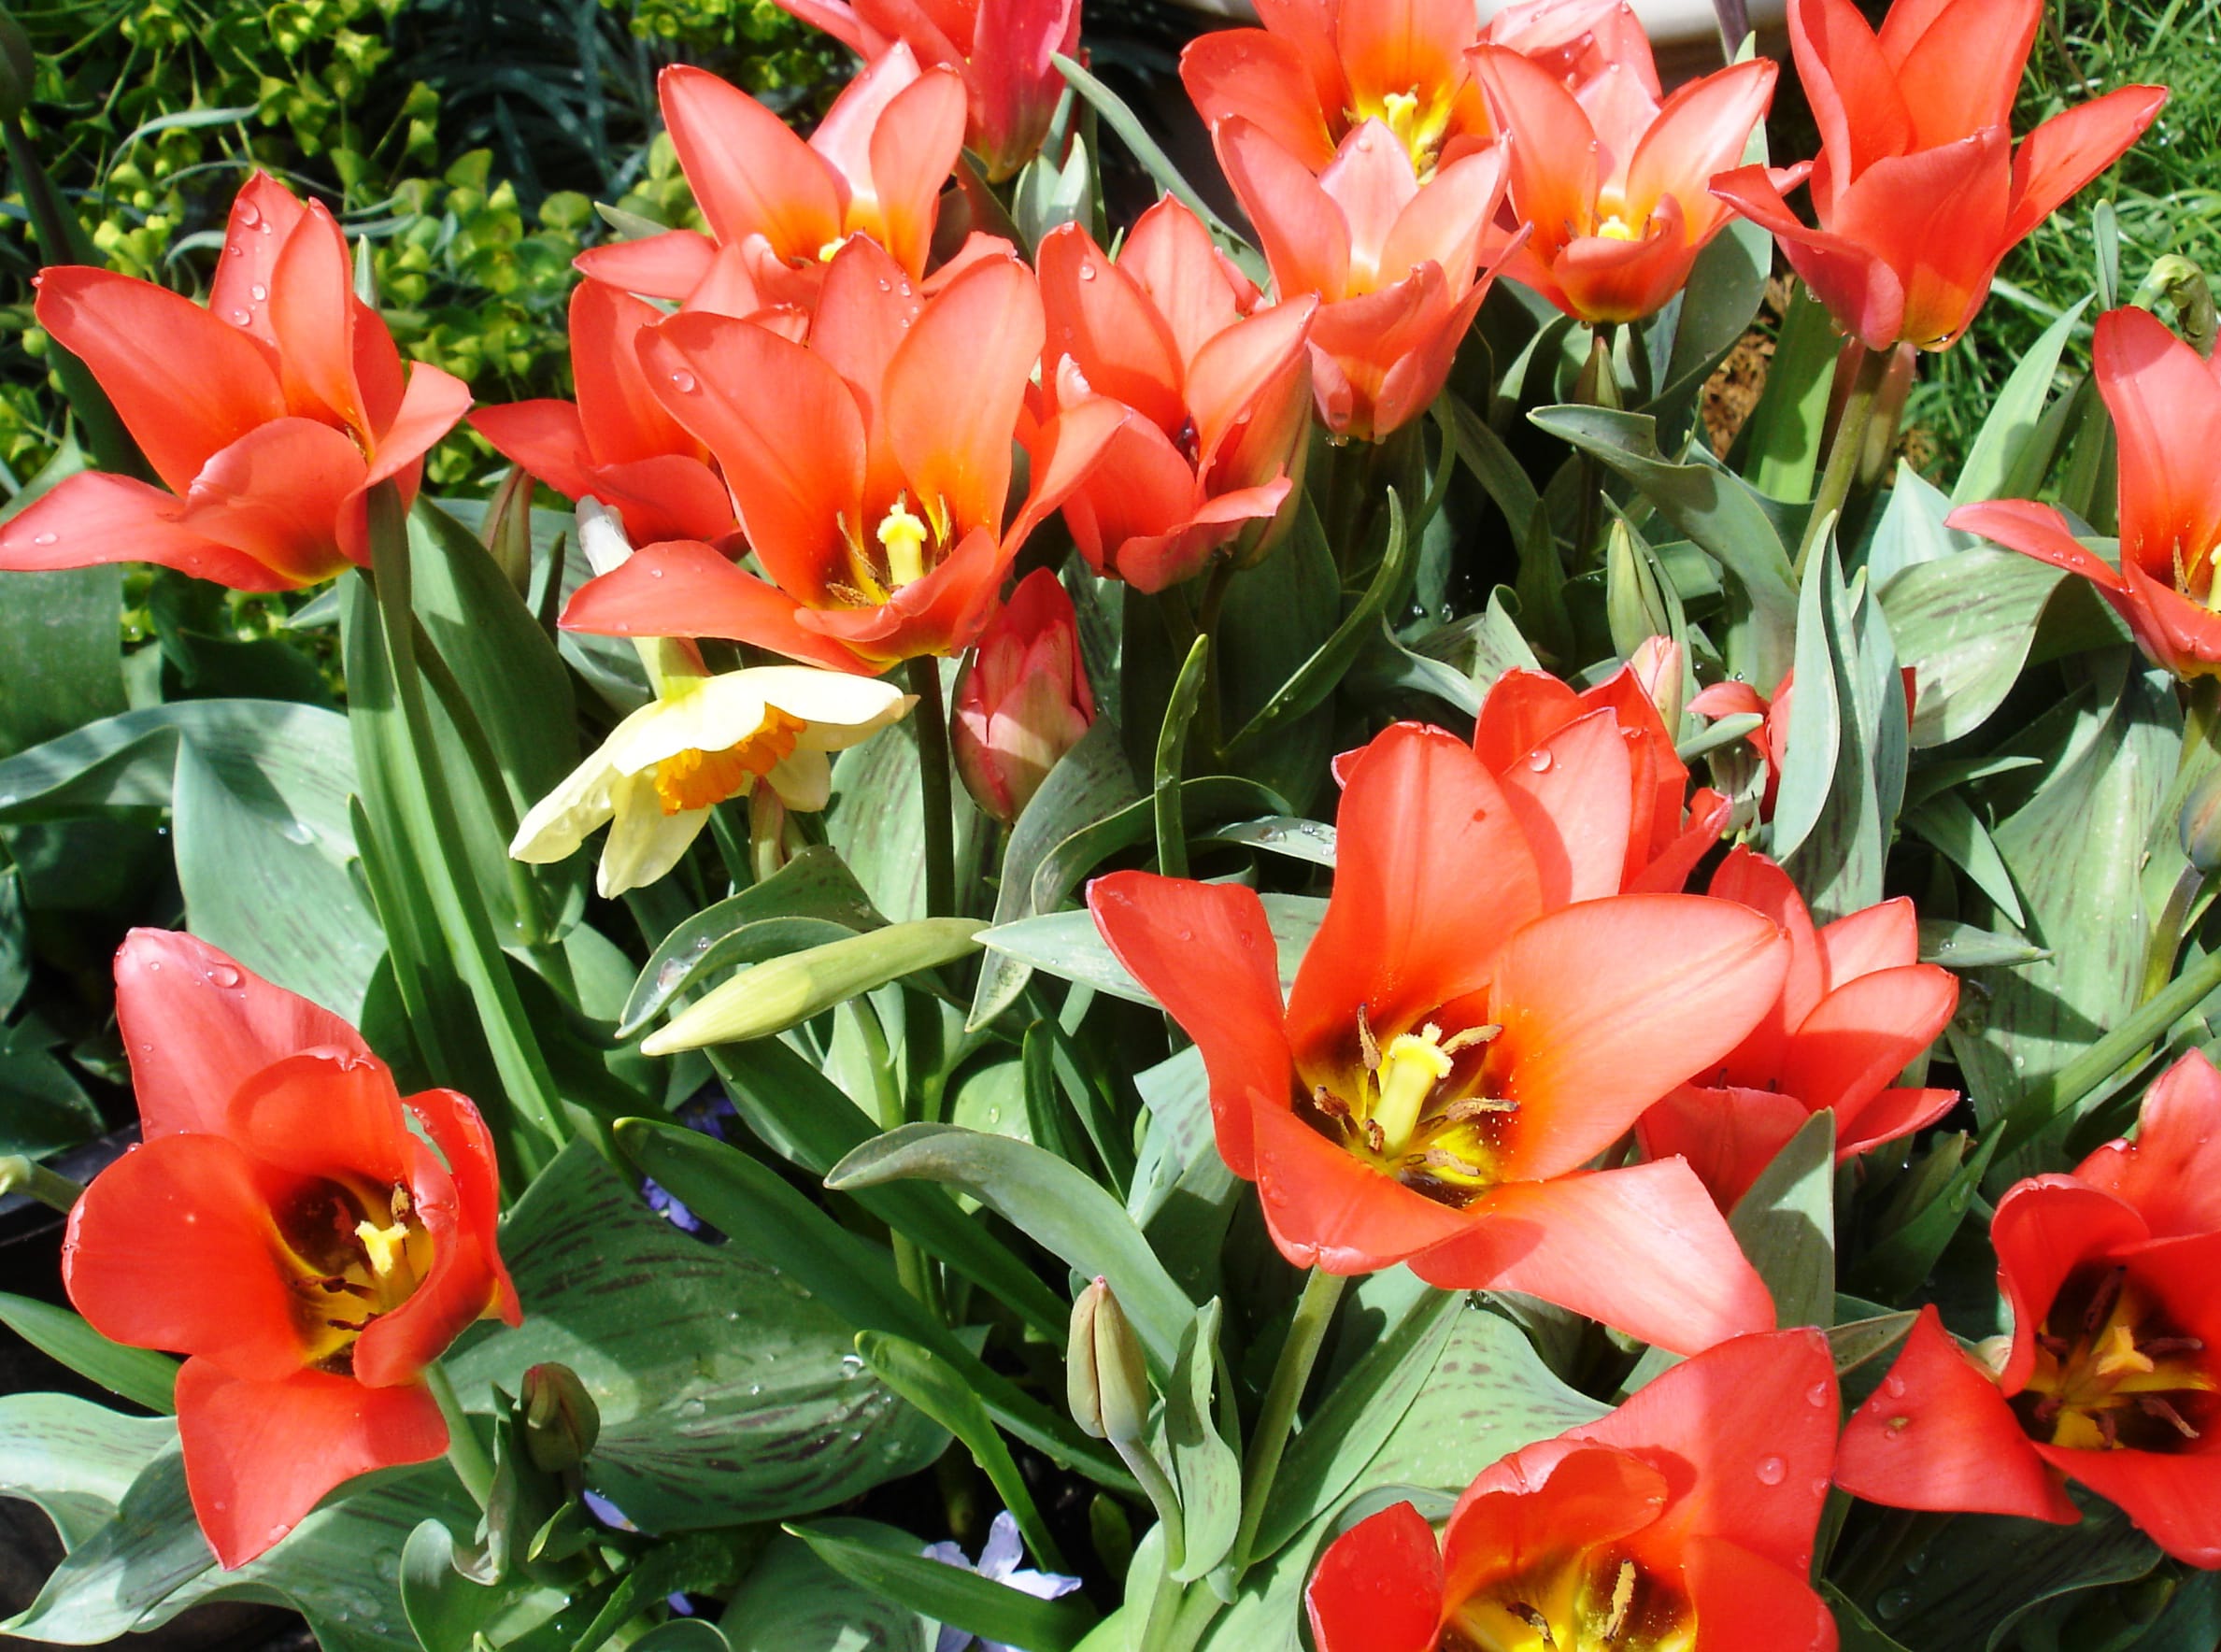 Tulipa 'Red Robin' is a species tulip that thrives in rock gardens and withstands rainy spring weather.